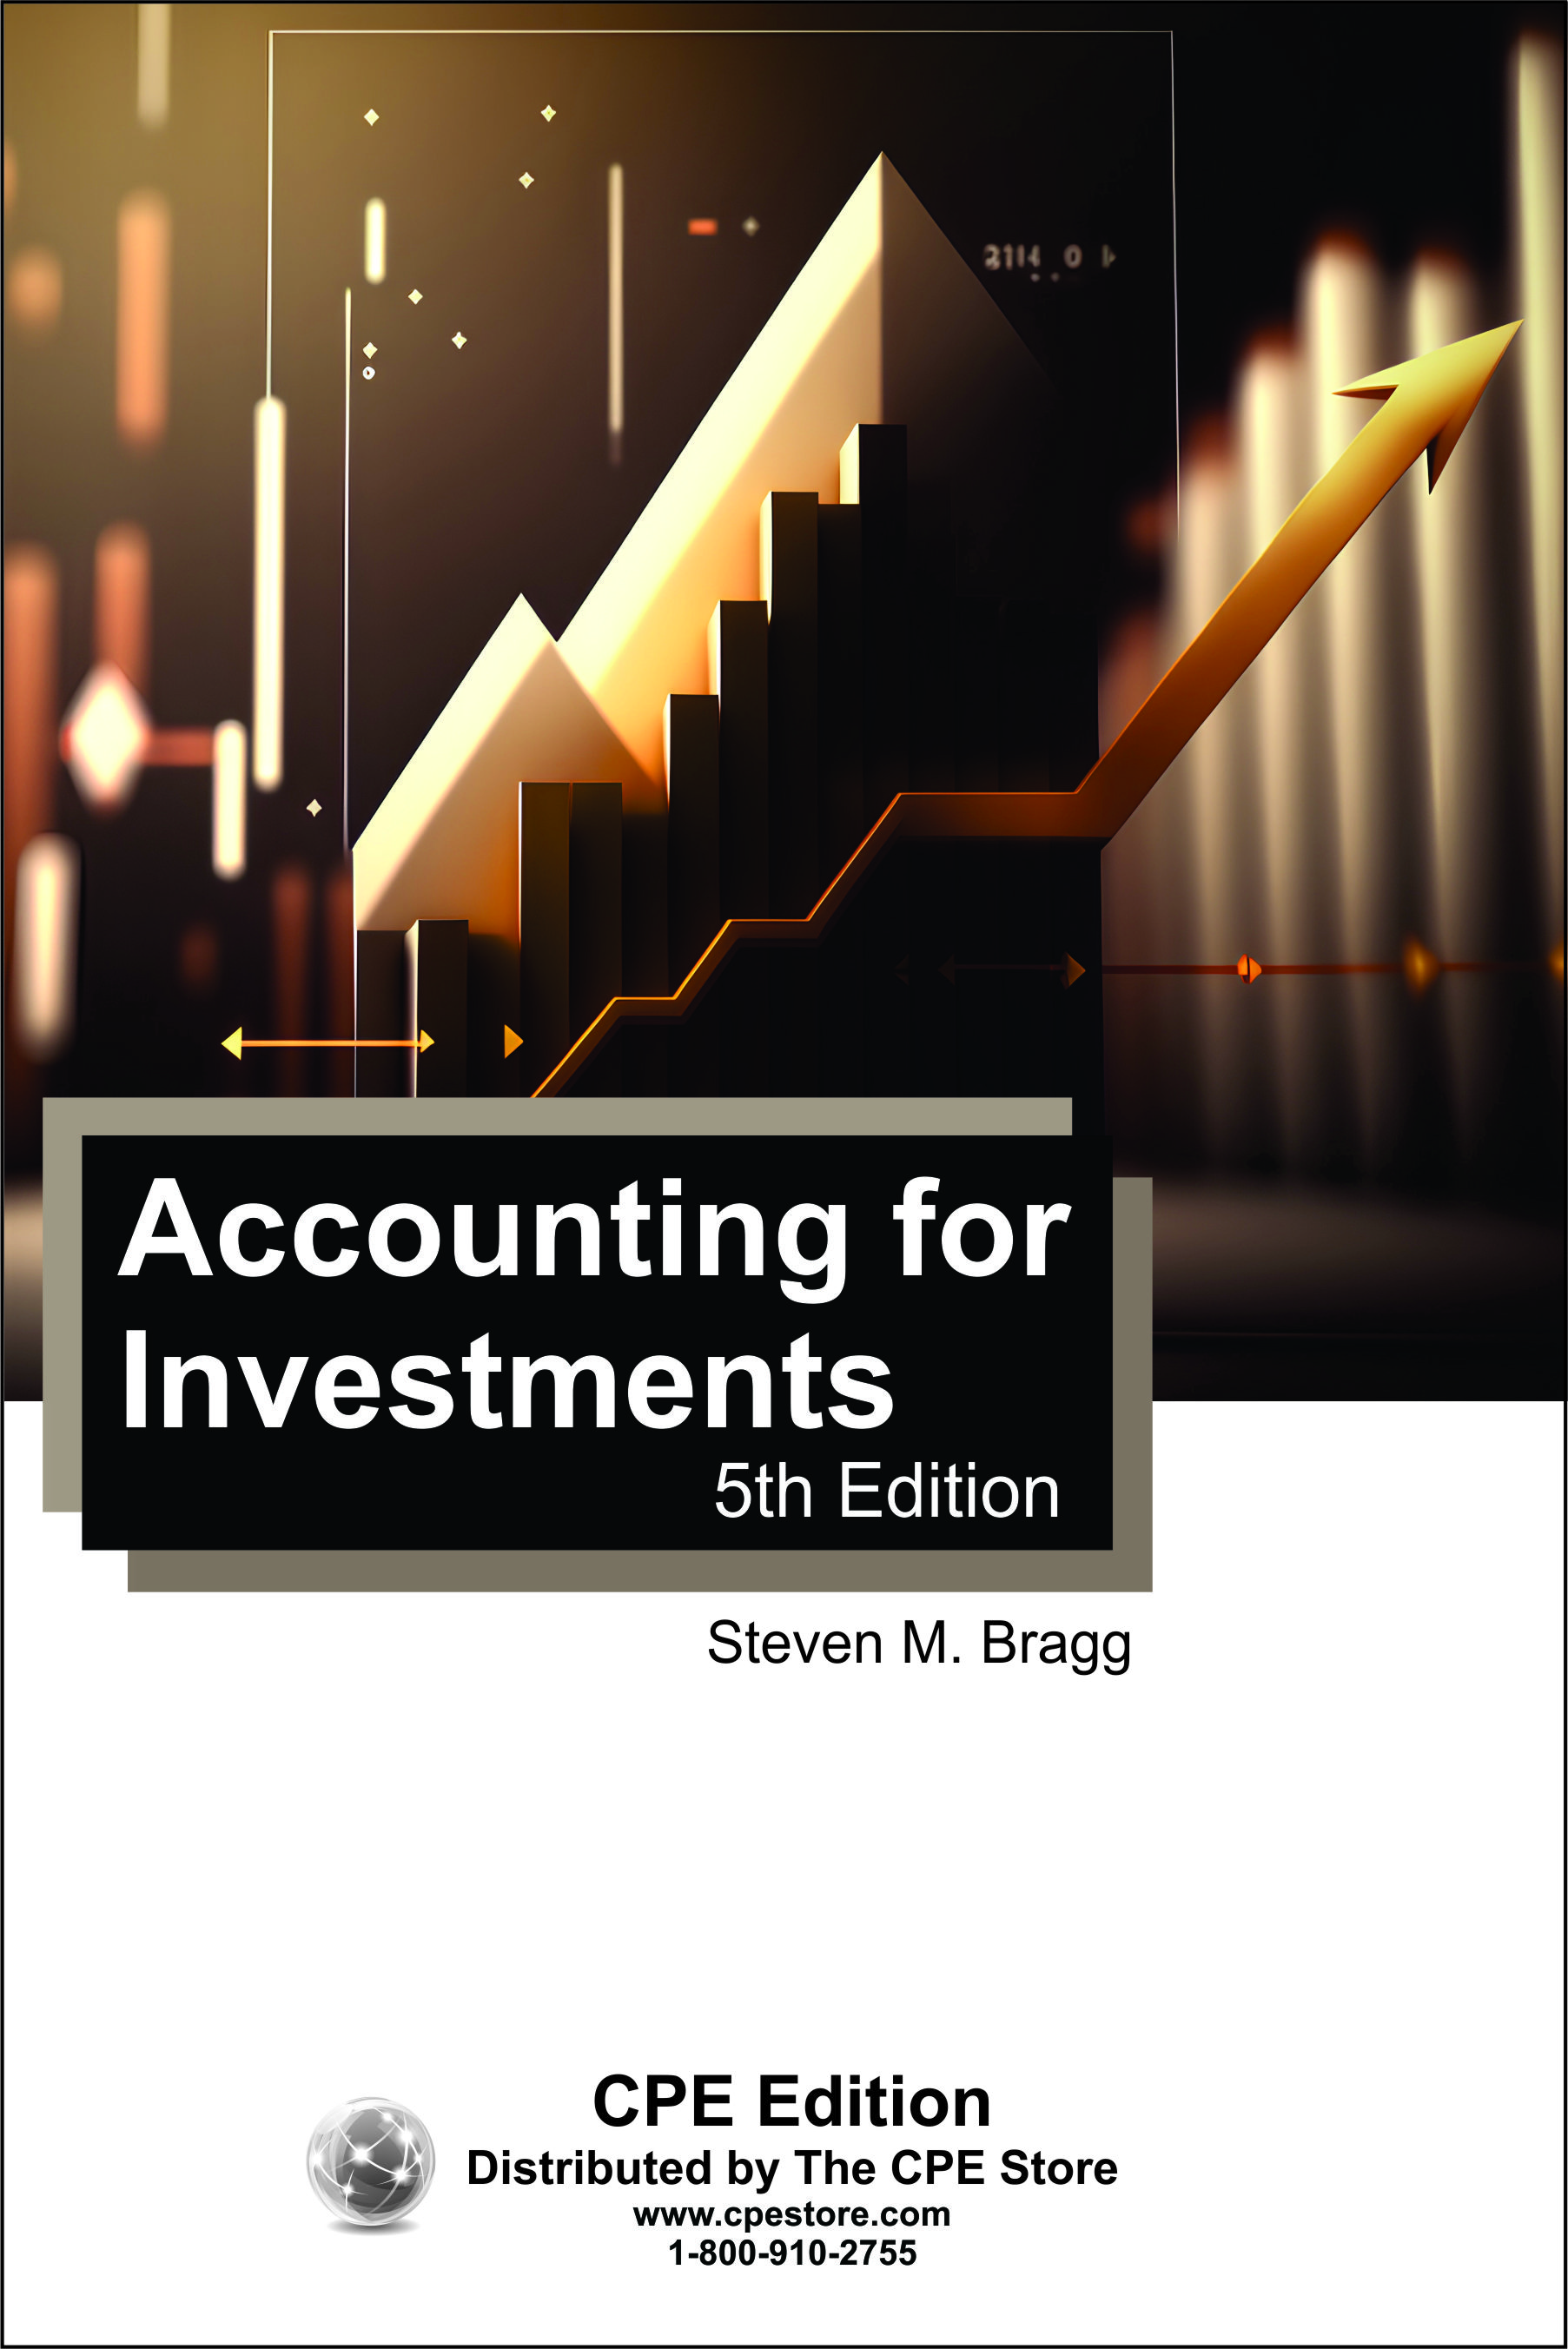 Accounting for Investments